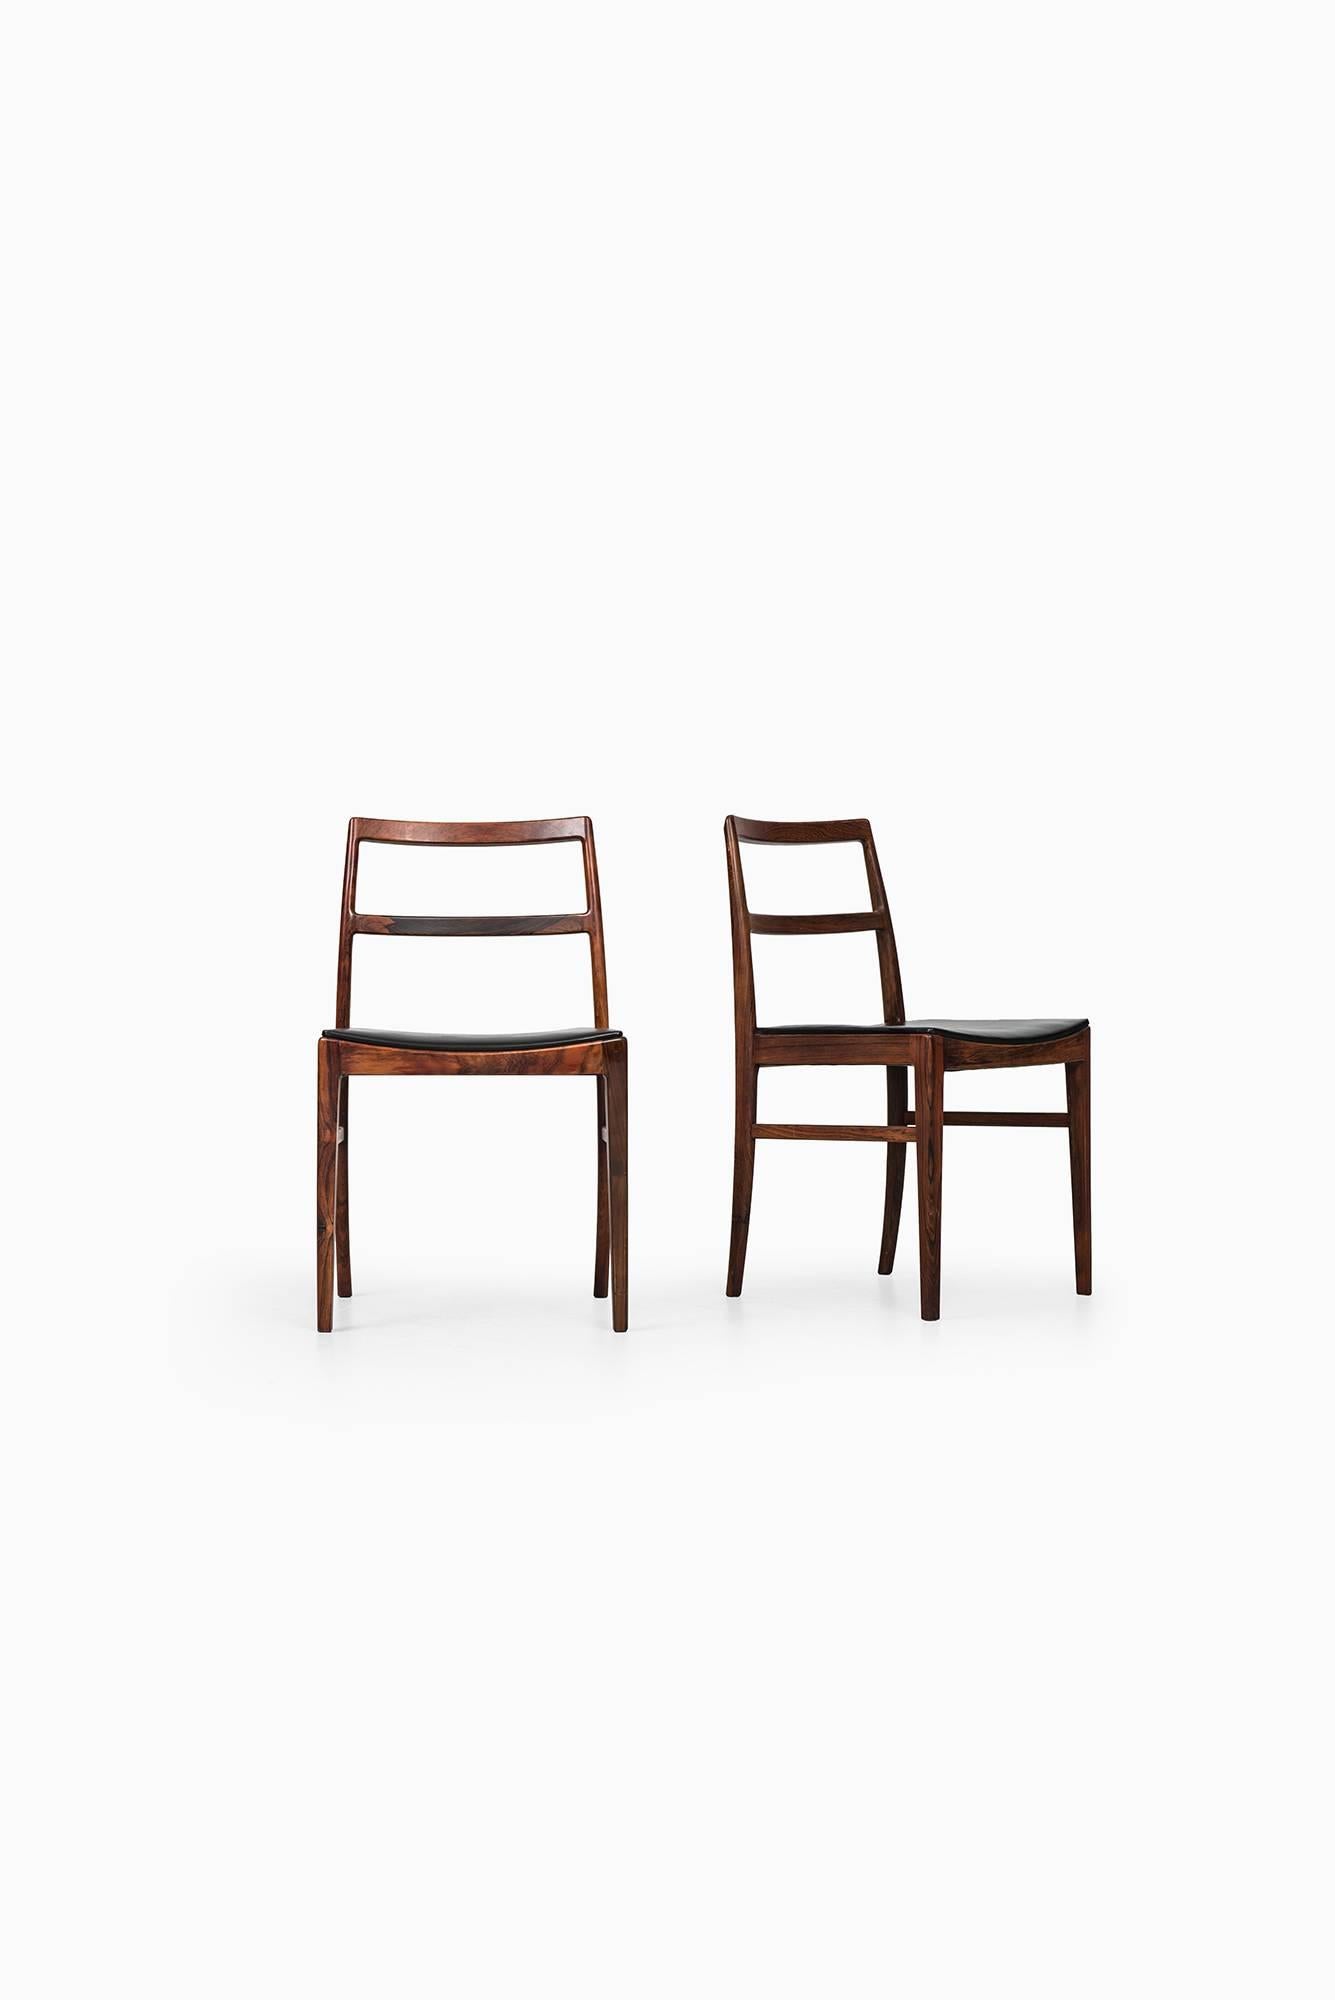 Rare set of four dining chairs model 430 designed by Arne Vodder. Produced by Sibast møbelfabrik in Denmark.